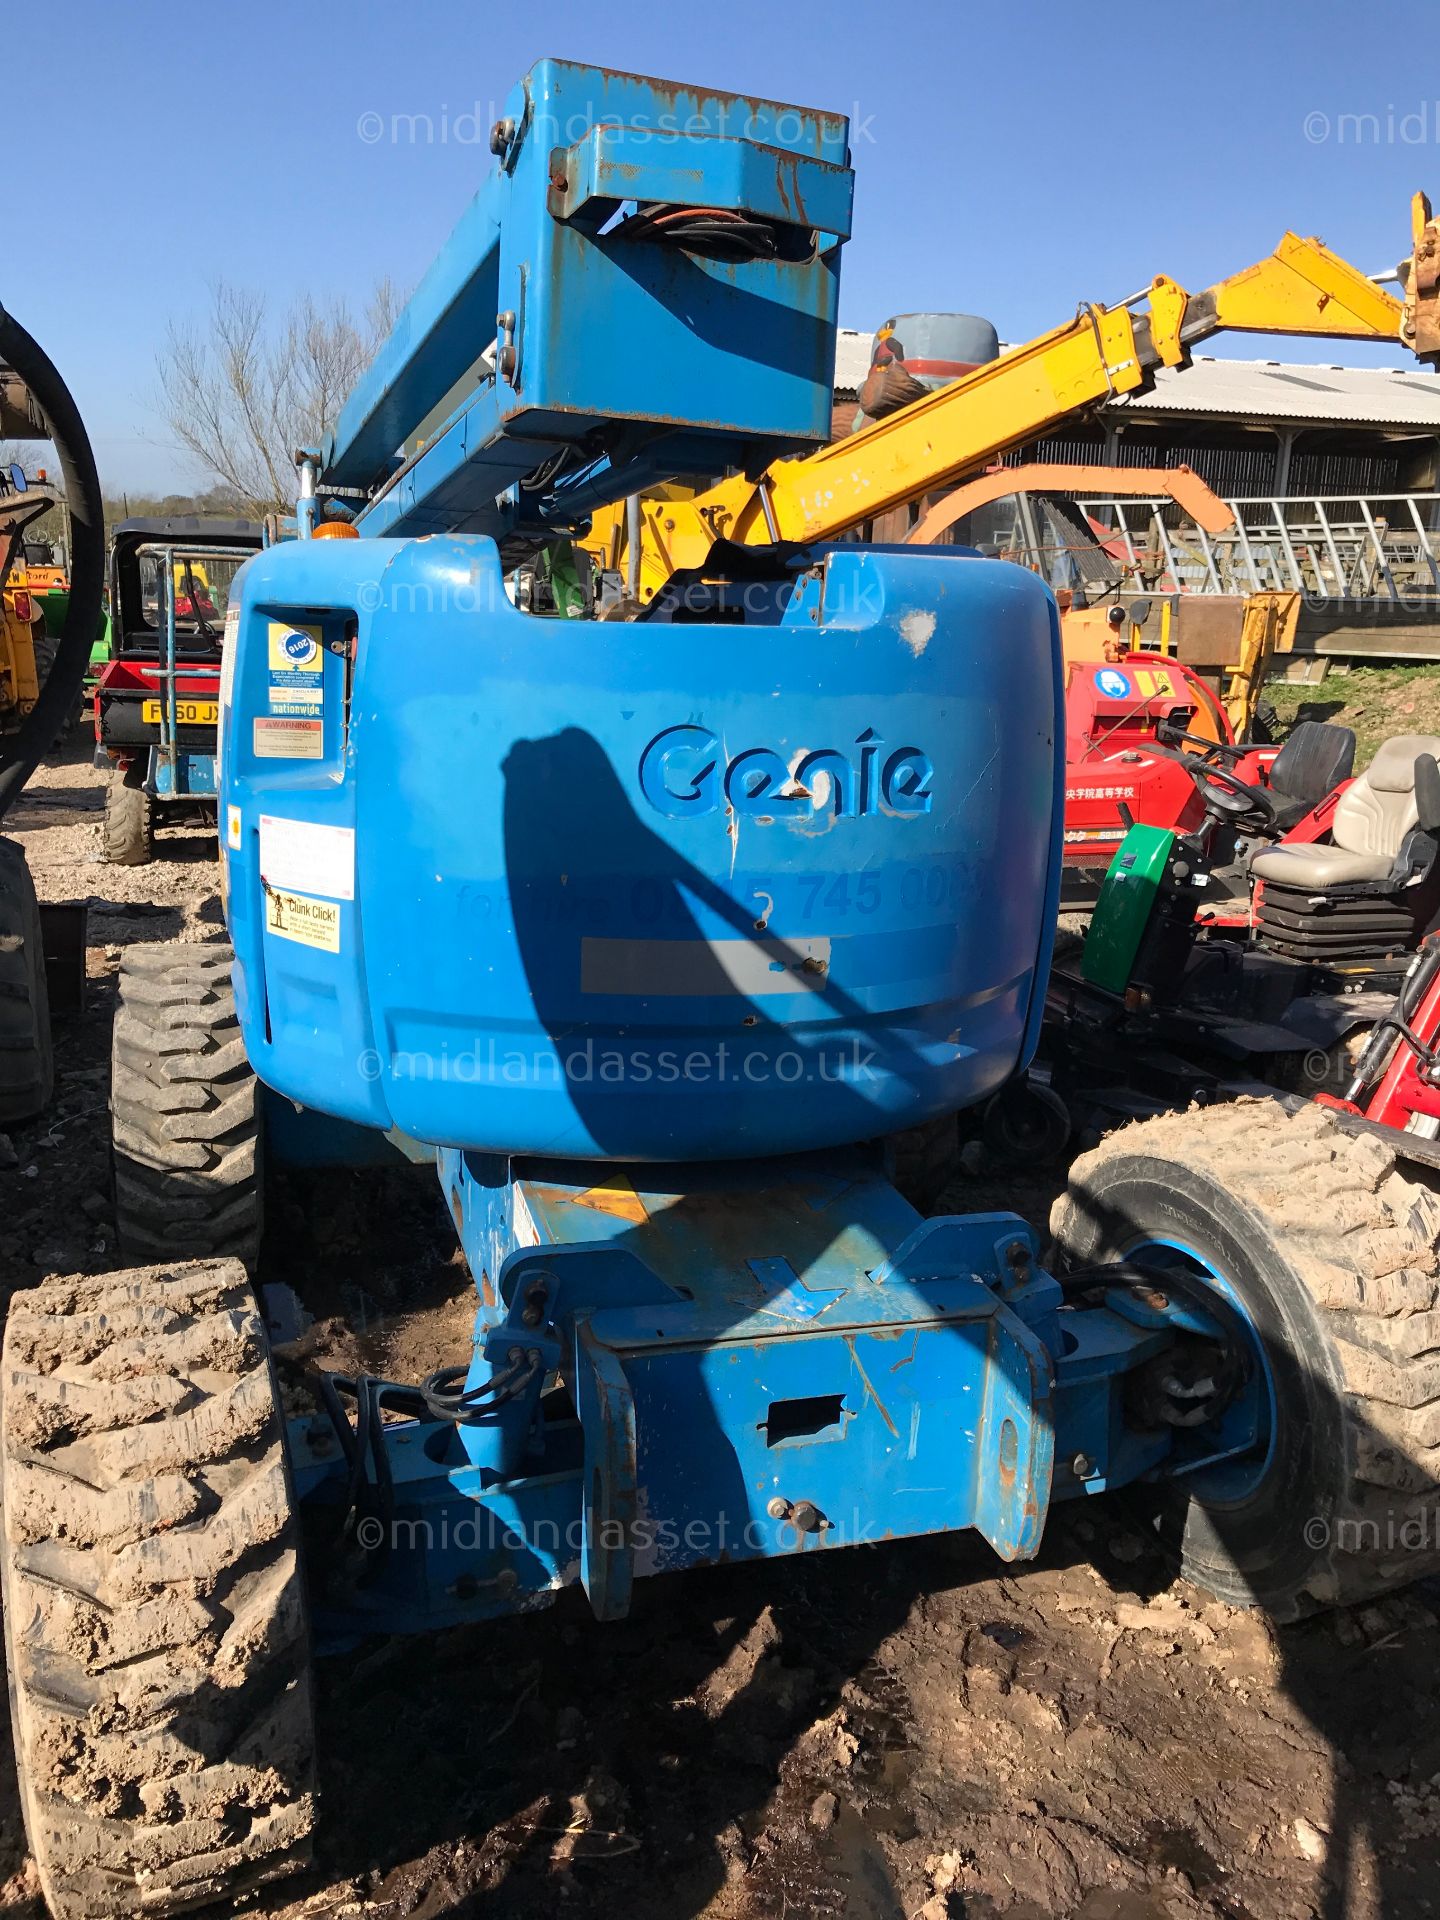 DS - GENIE Z45-25 CHERRY PICKER 4WD    DIESEL GOOD WORKING ORDER   COLLECTION FROM PILSLEY S45 - Image 2 of 4